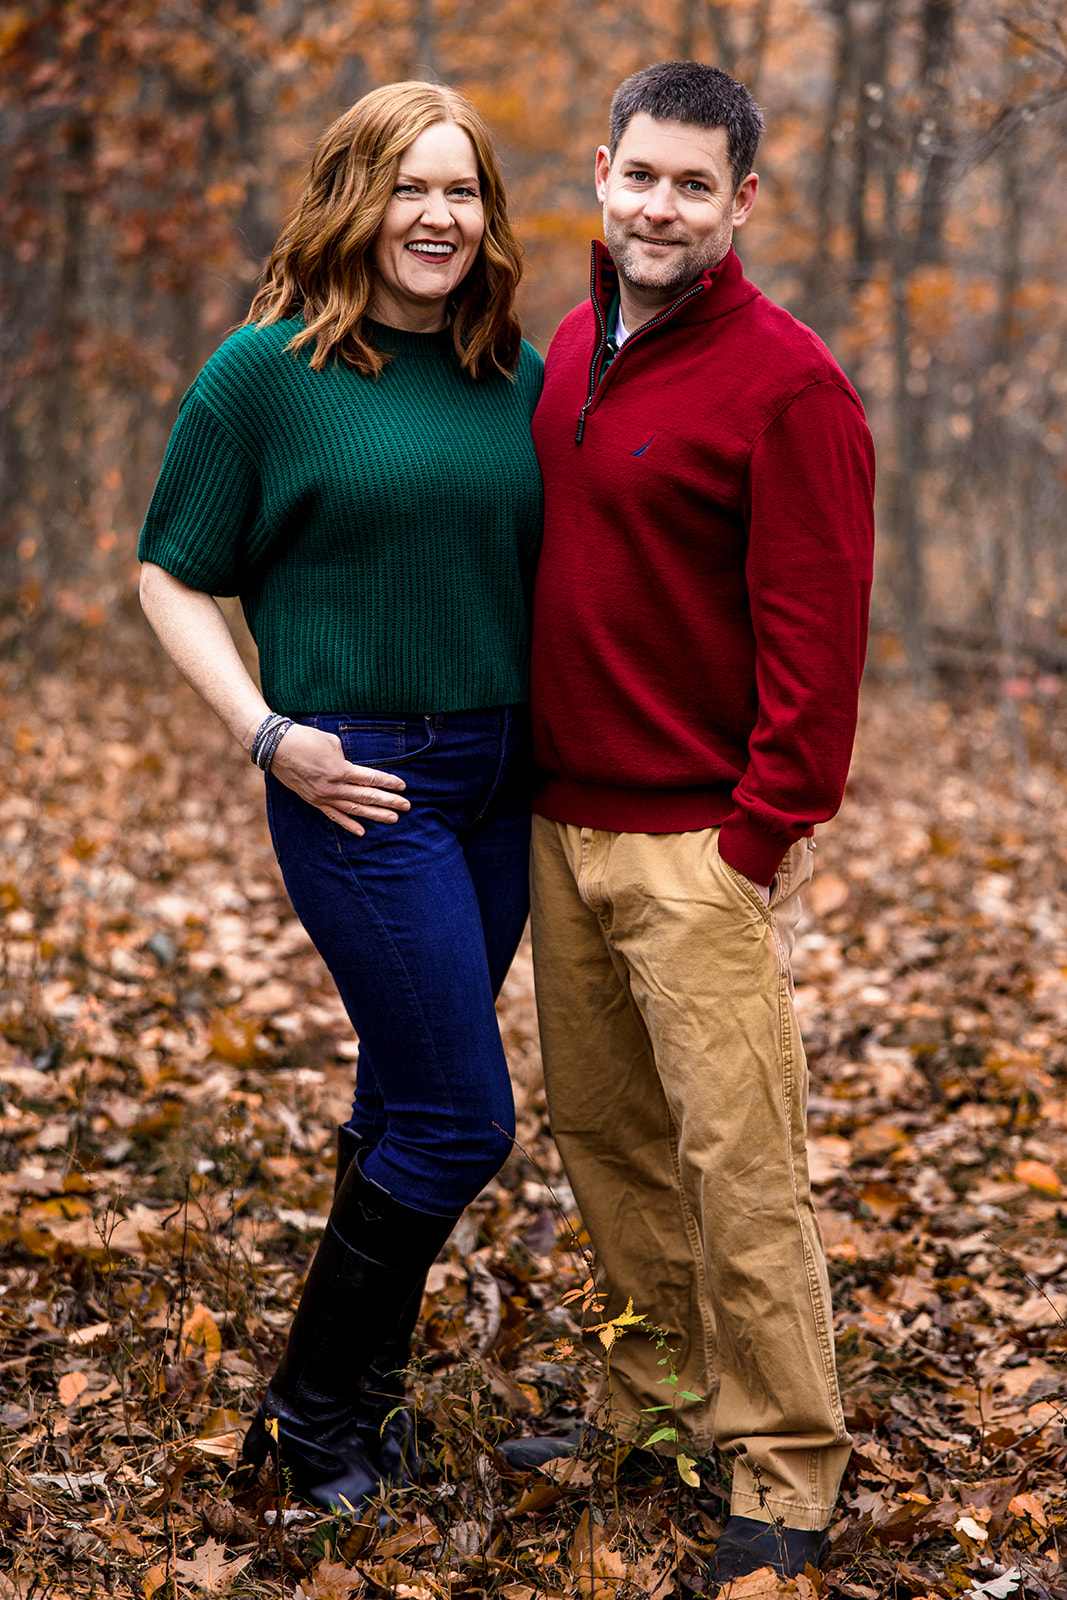 Autumnal Elegance in West Salem, WI: Family Portraits by Jeff Wiswell of J.L. Wiswell Photography of Onalaska, WI